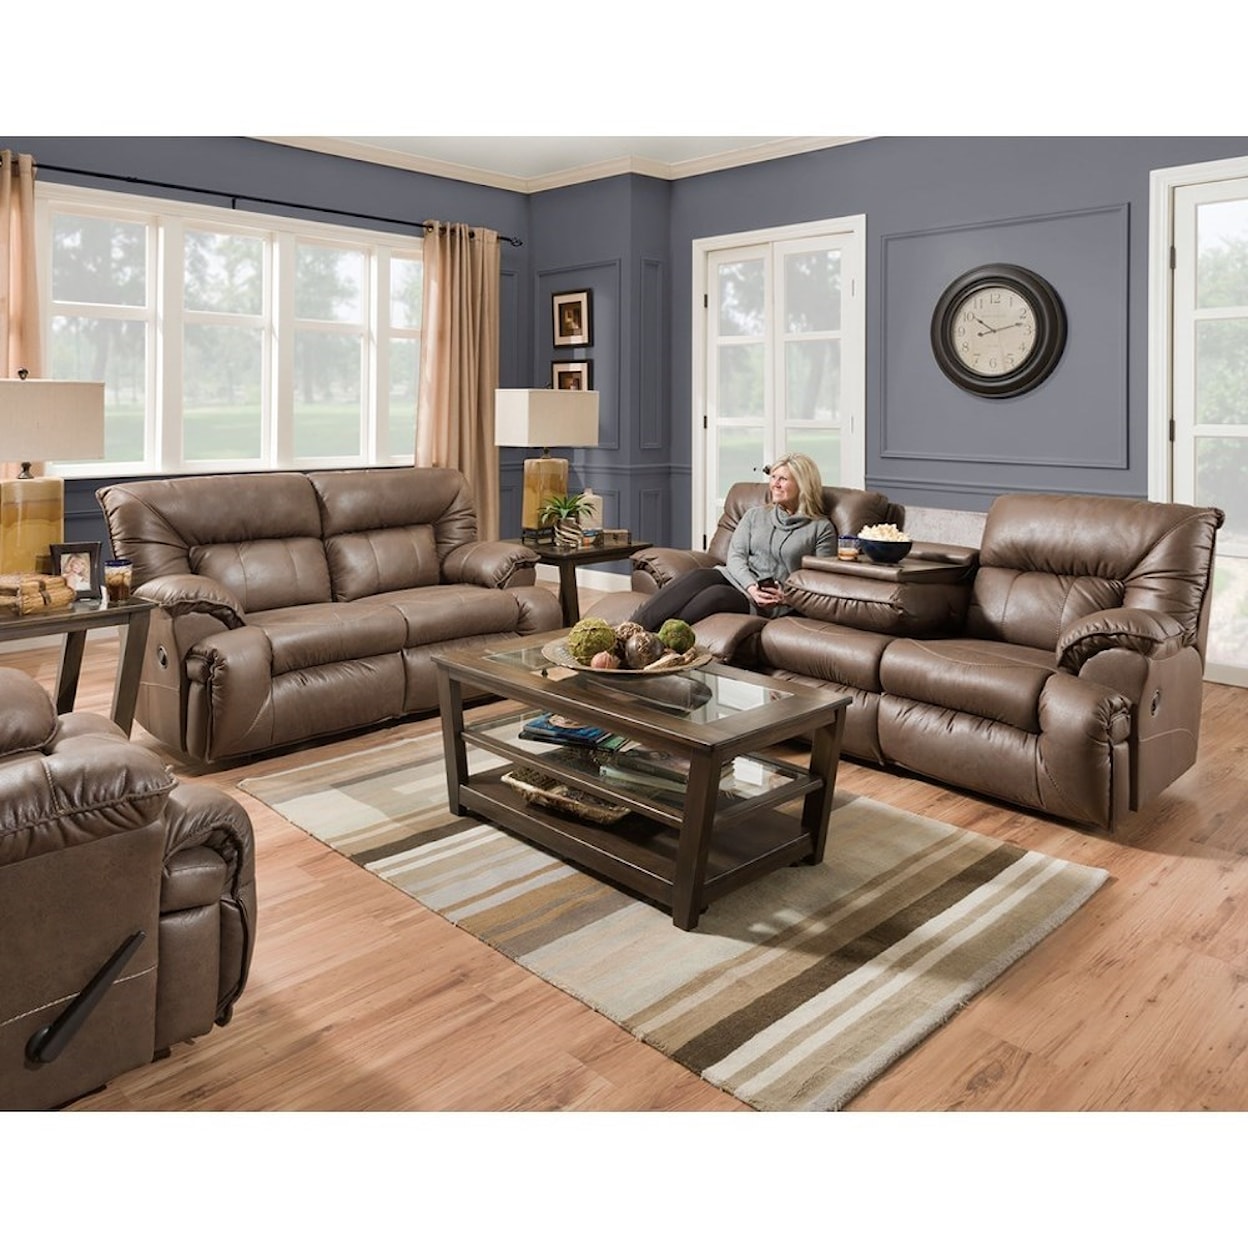 Franklin 764 Hector Reclining Living Room Group